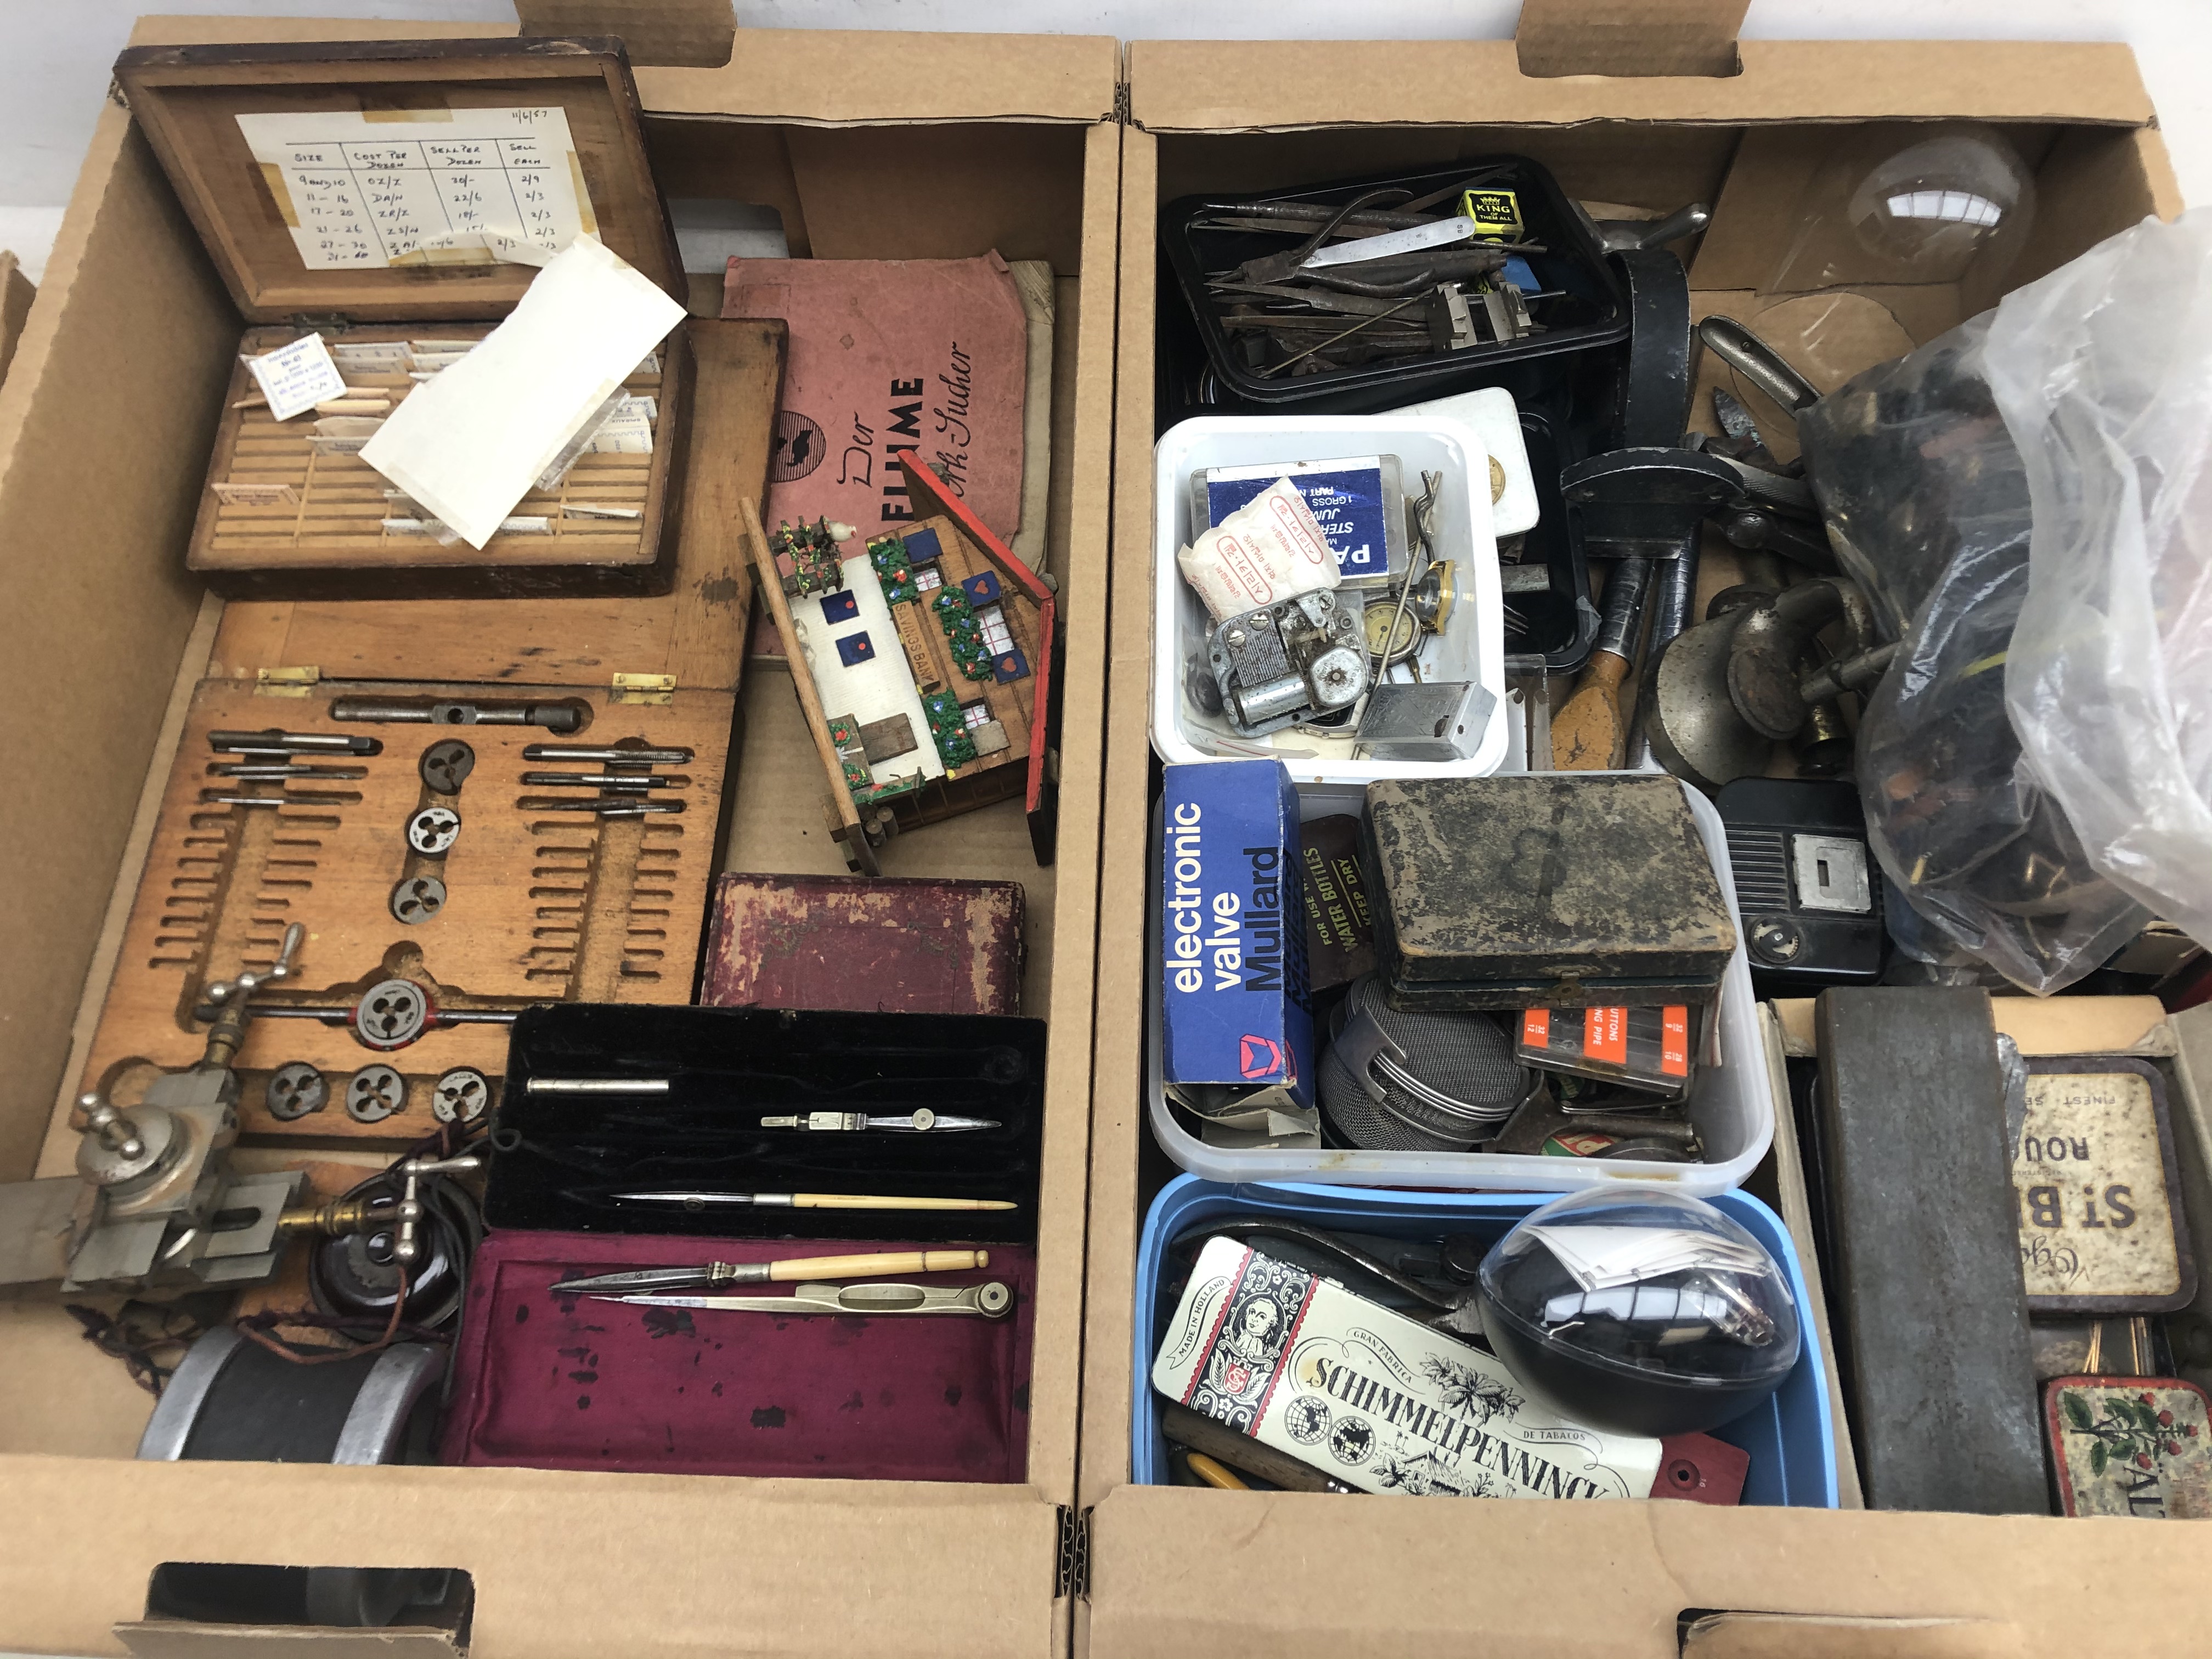 Collection of horologist's/watch maker's tools and equipment including precision instruments, - Image 2 of 2